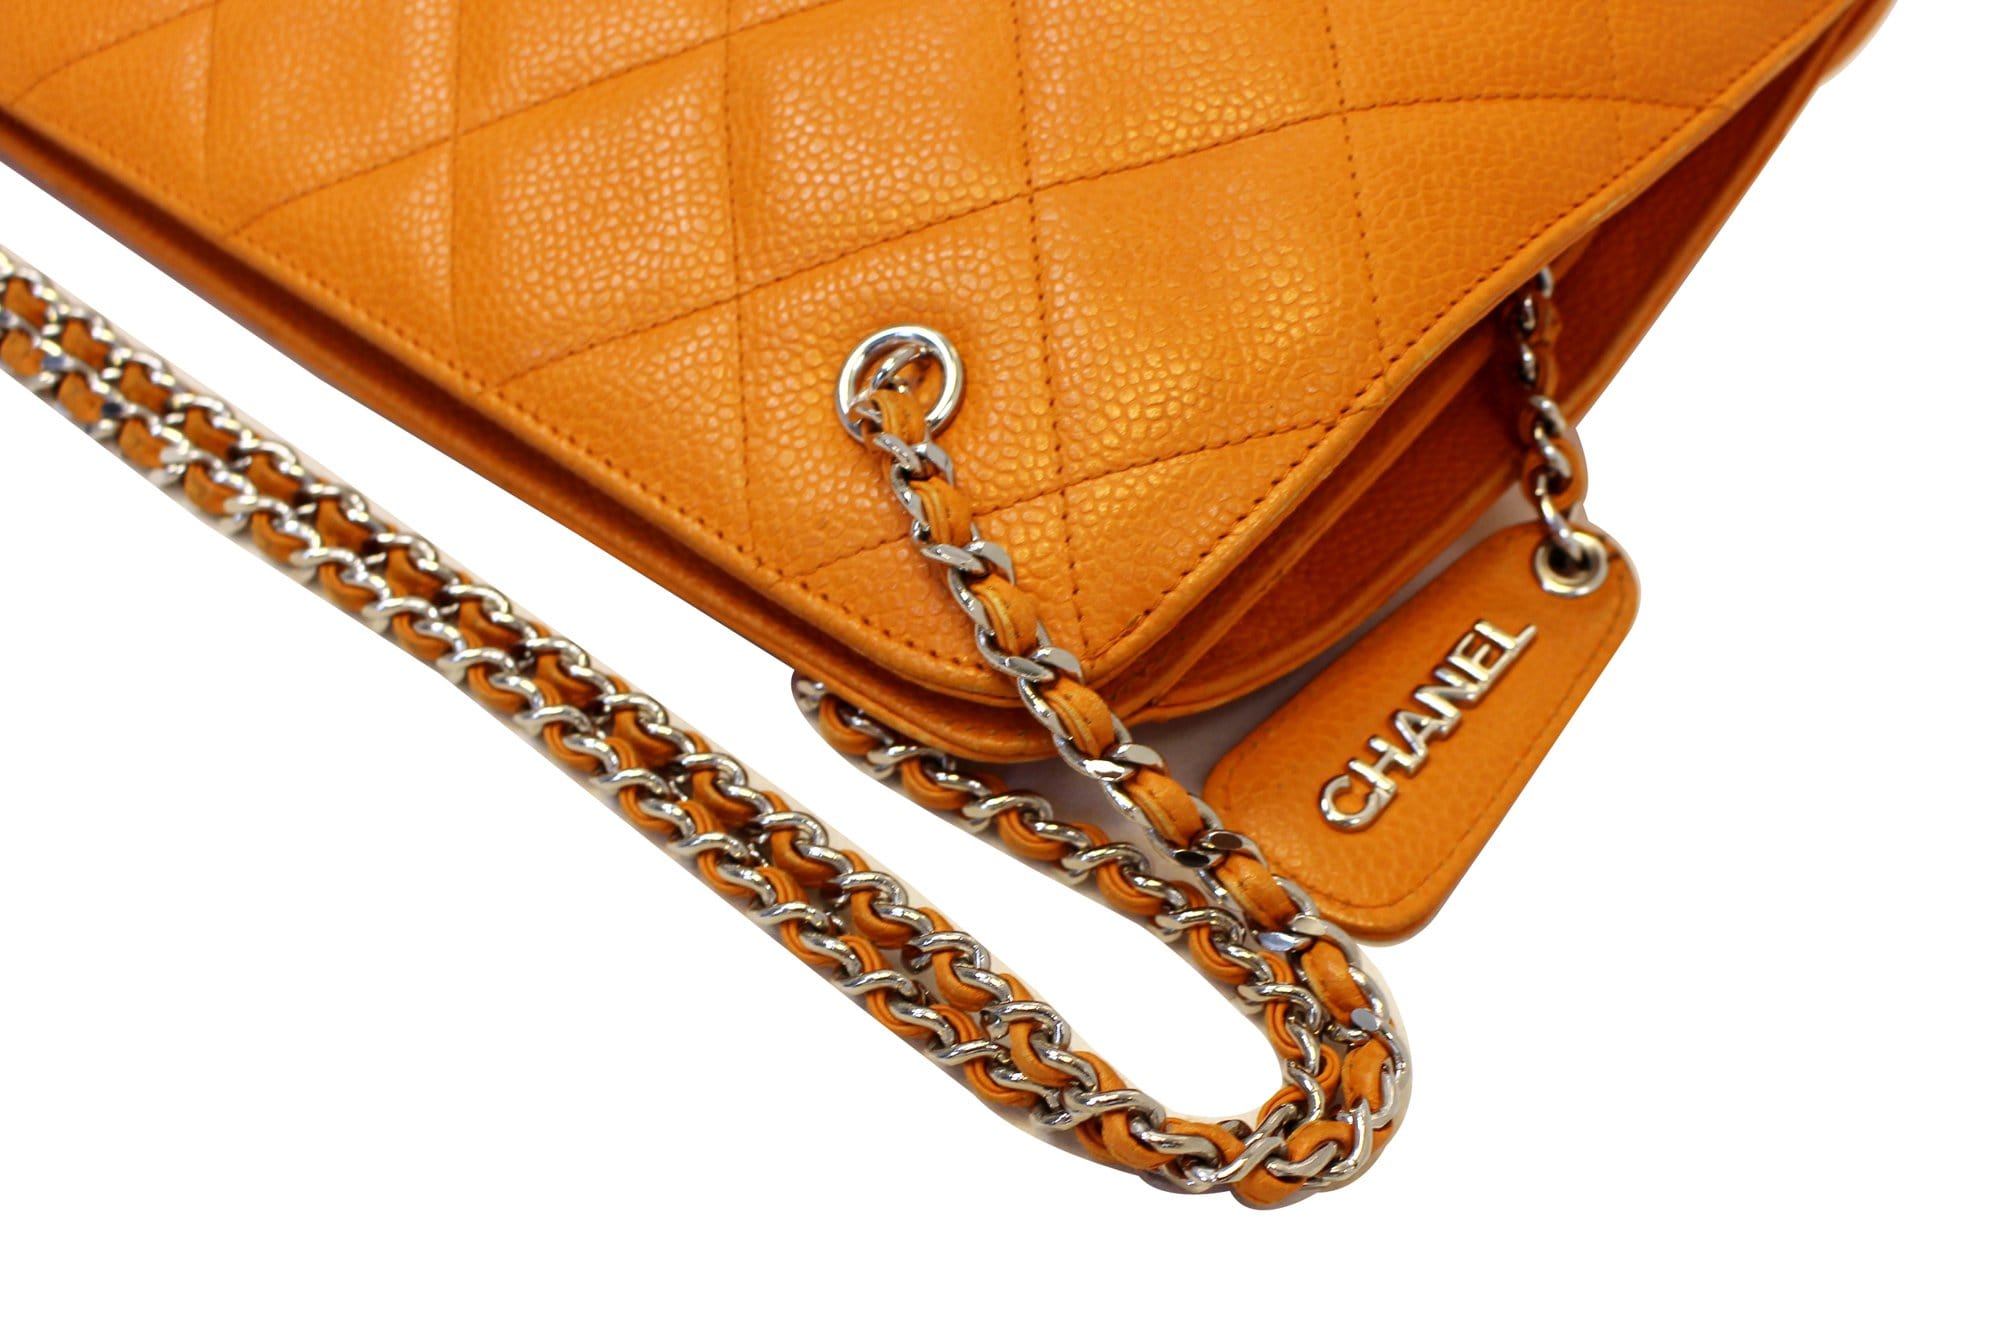 Timeless/classique leather crossbody bag Chanel Orange in Leather - 33849589